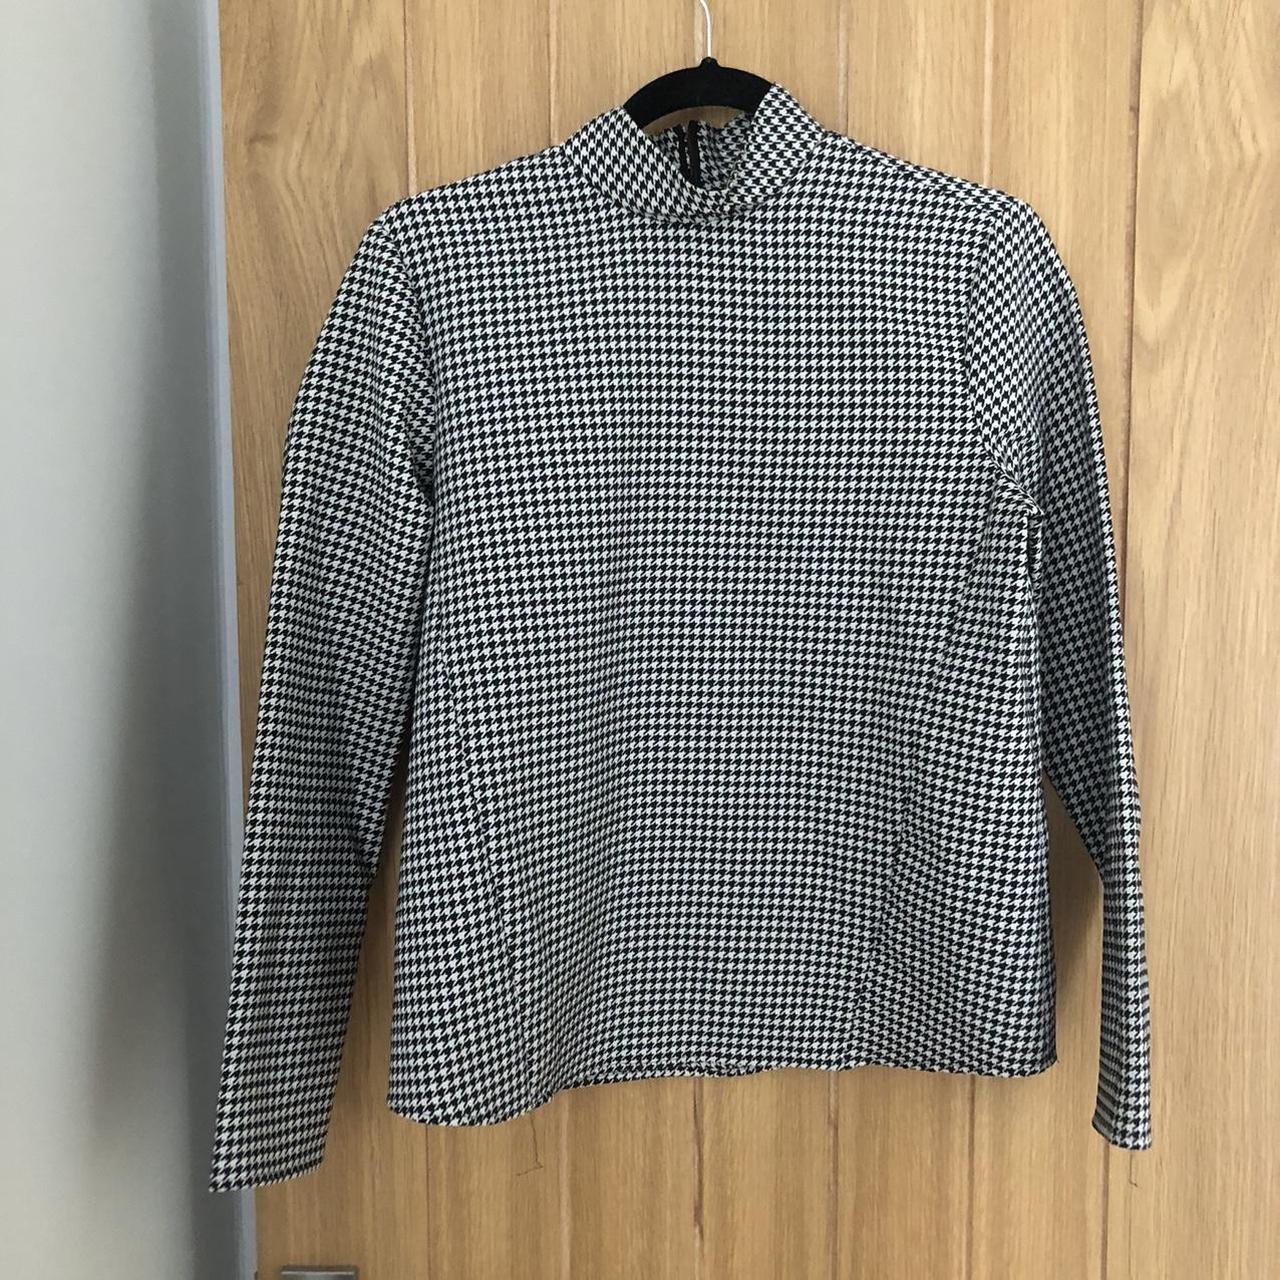 Houndtooth print top From Zara size m... - Depop